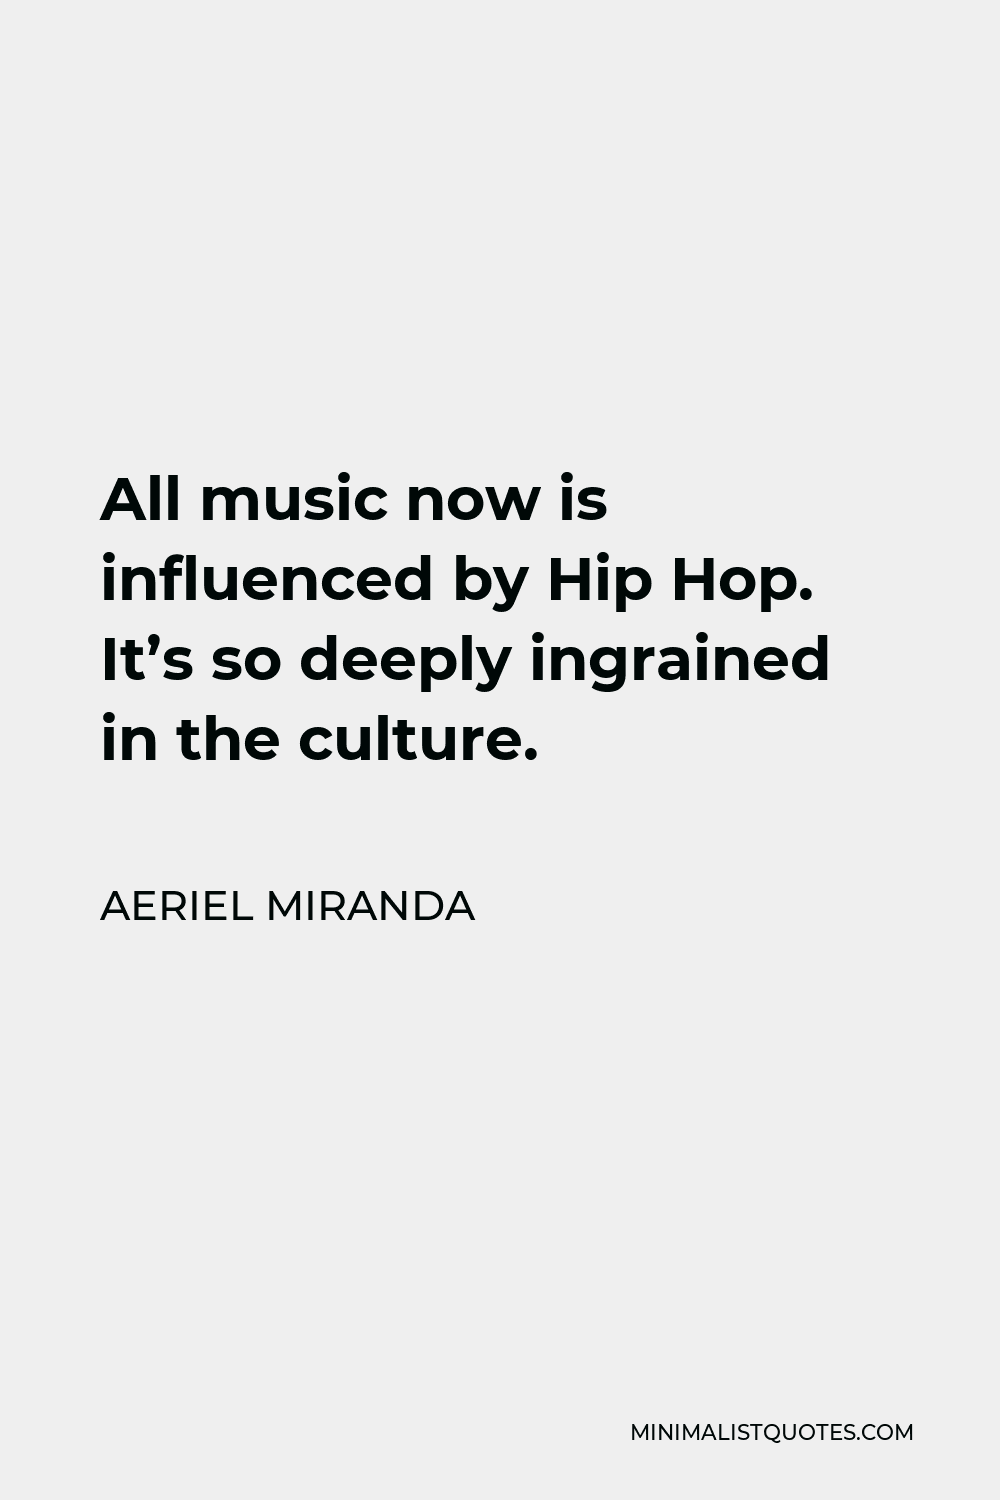 Aeriel Miranda Quote - All music now is influenced by Hip Hop. It’s so deeply ingrained in the culture.